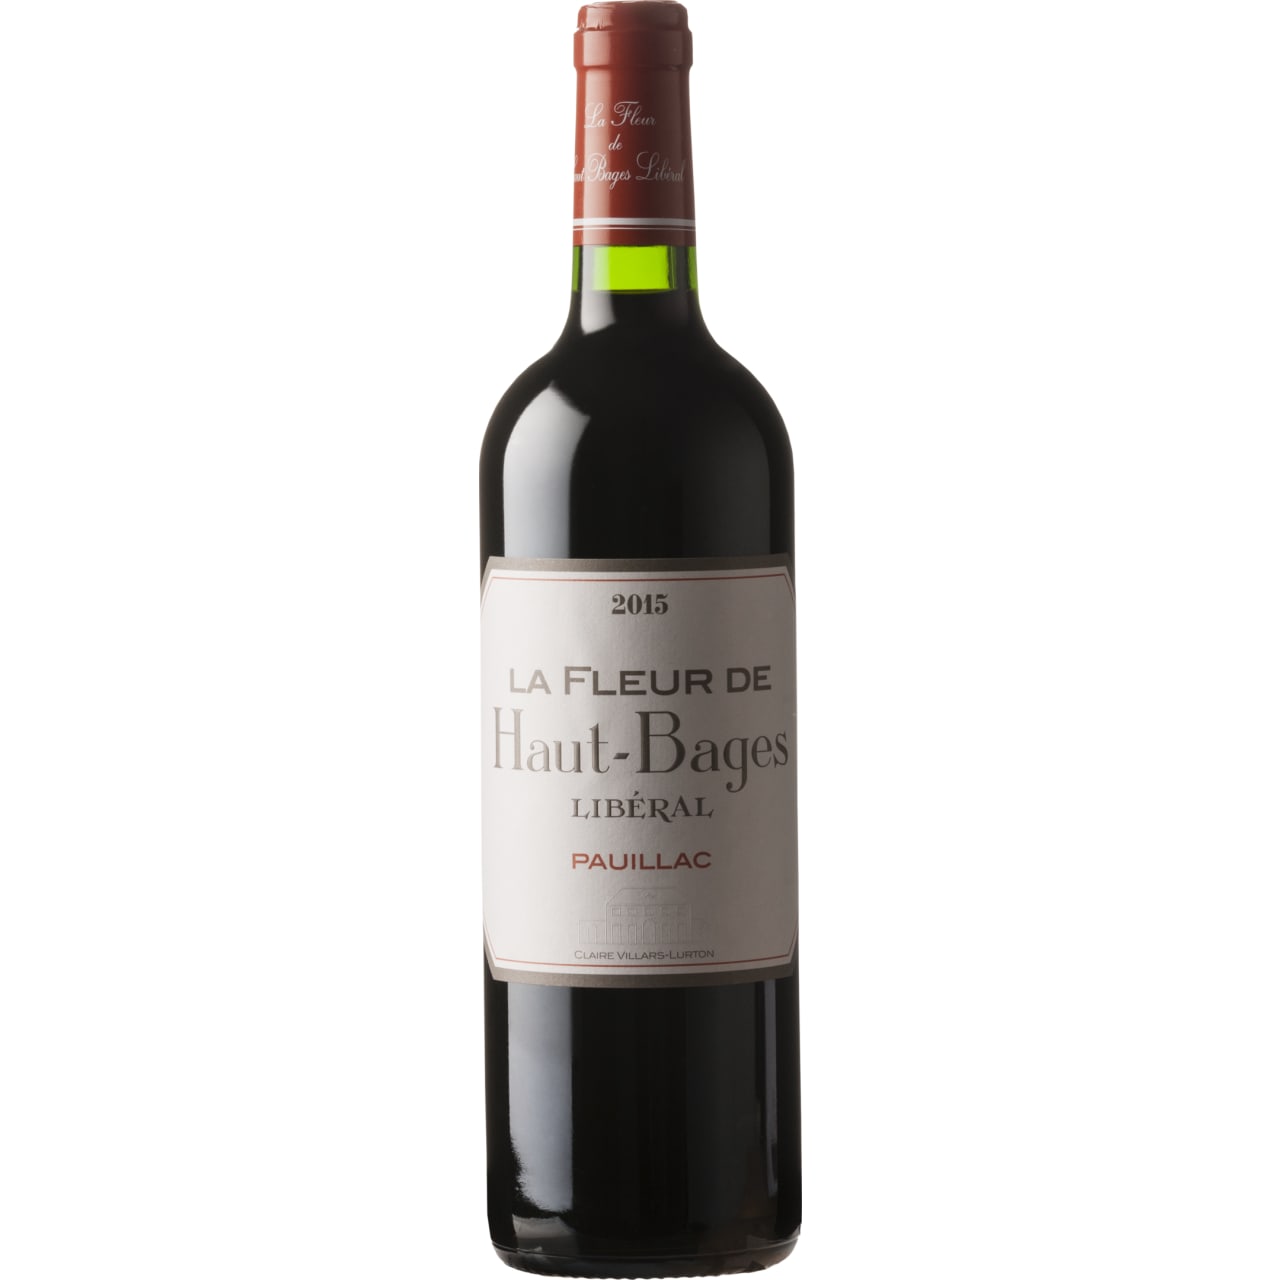 This fabulous wine is classic Left Bank Bordeaux: full-bodied, supple and velvety, with concentrated black fruit, cedar and liquorice.